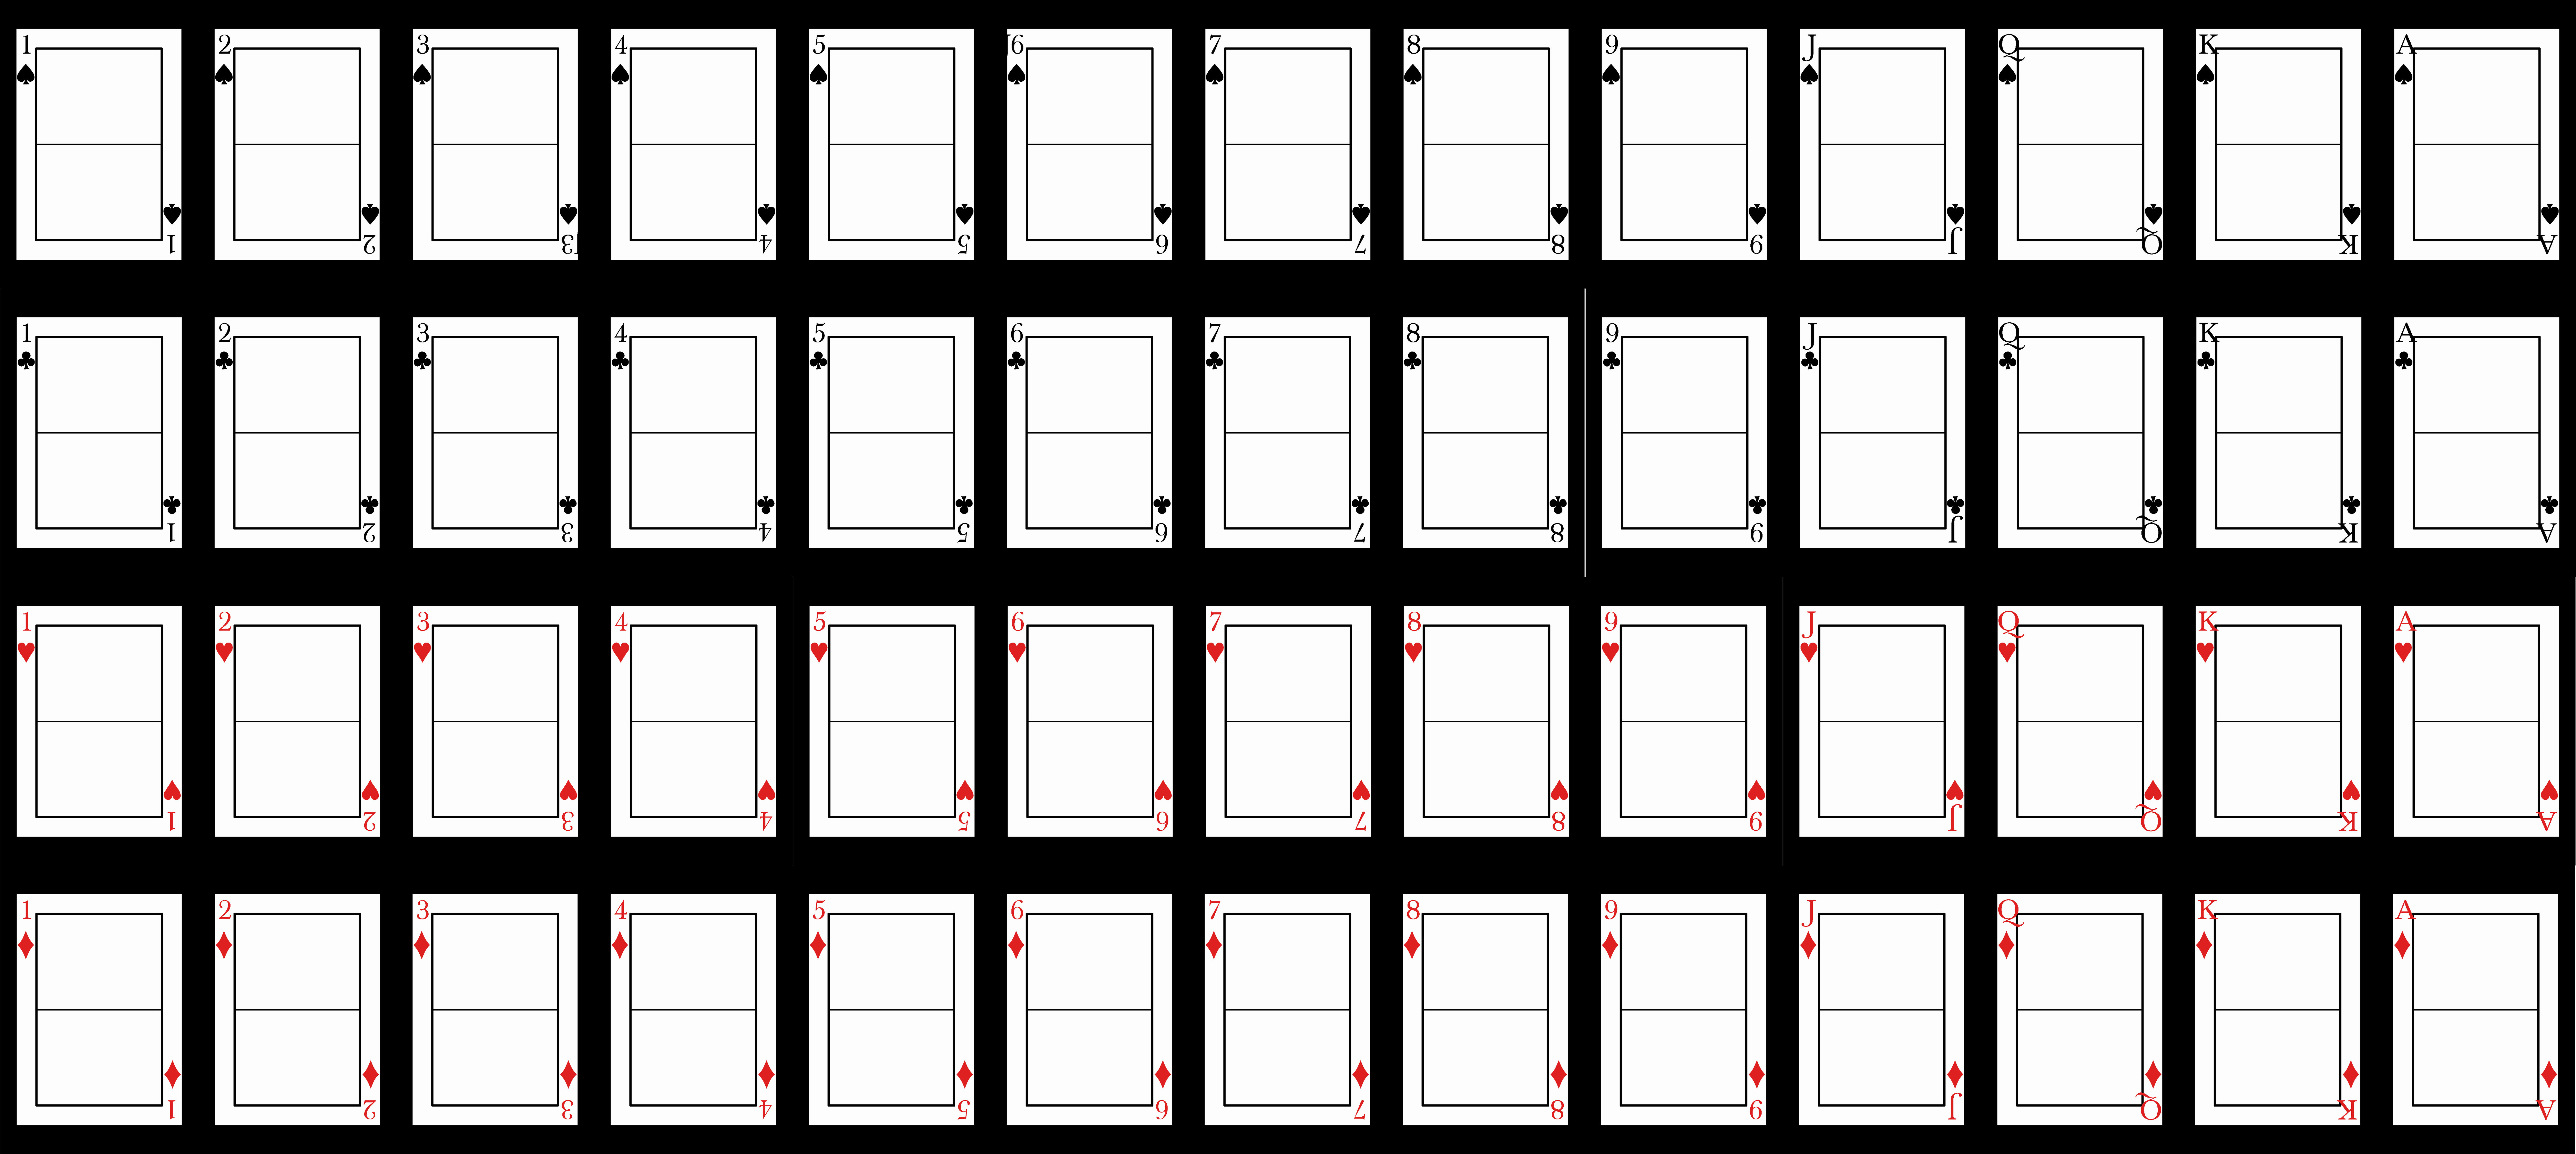 Gallery of Blank Playing Card Template.